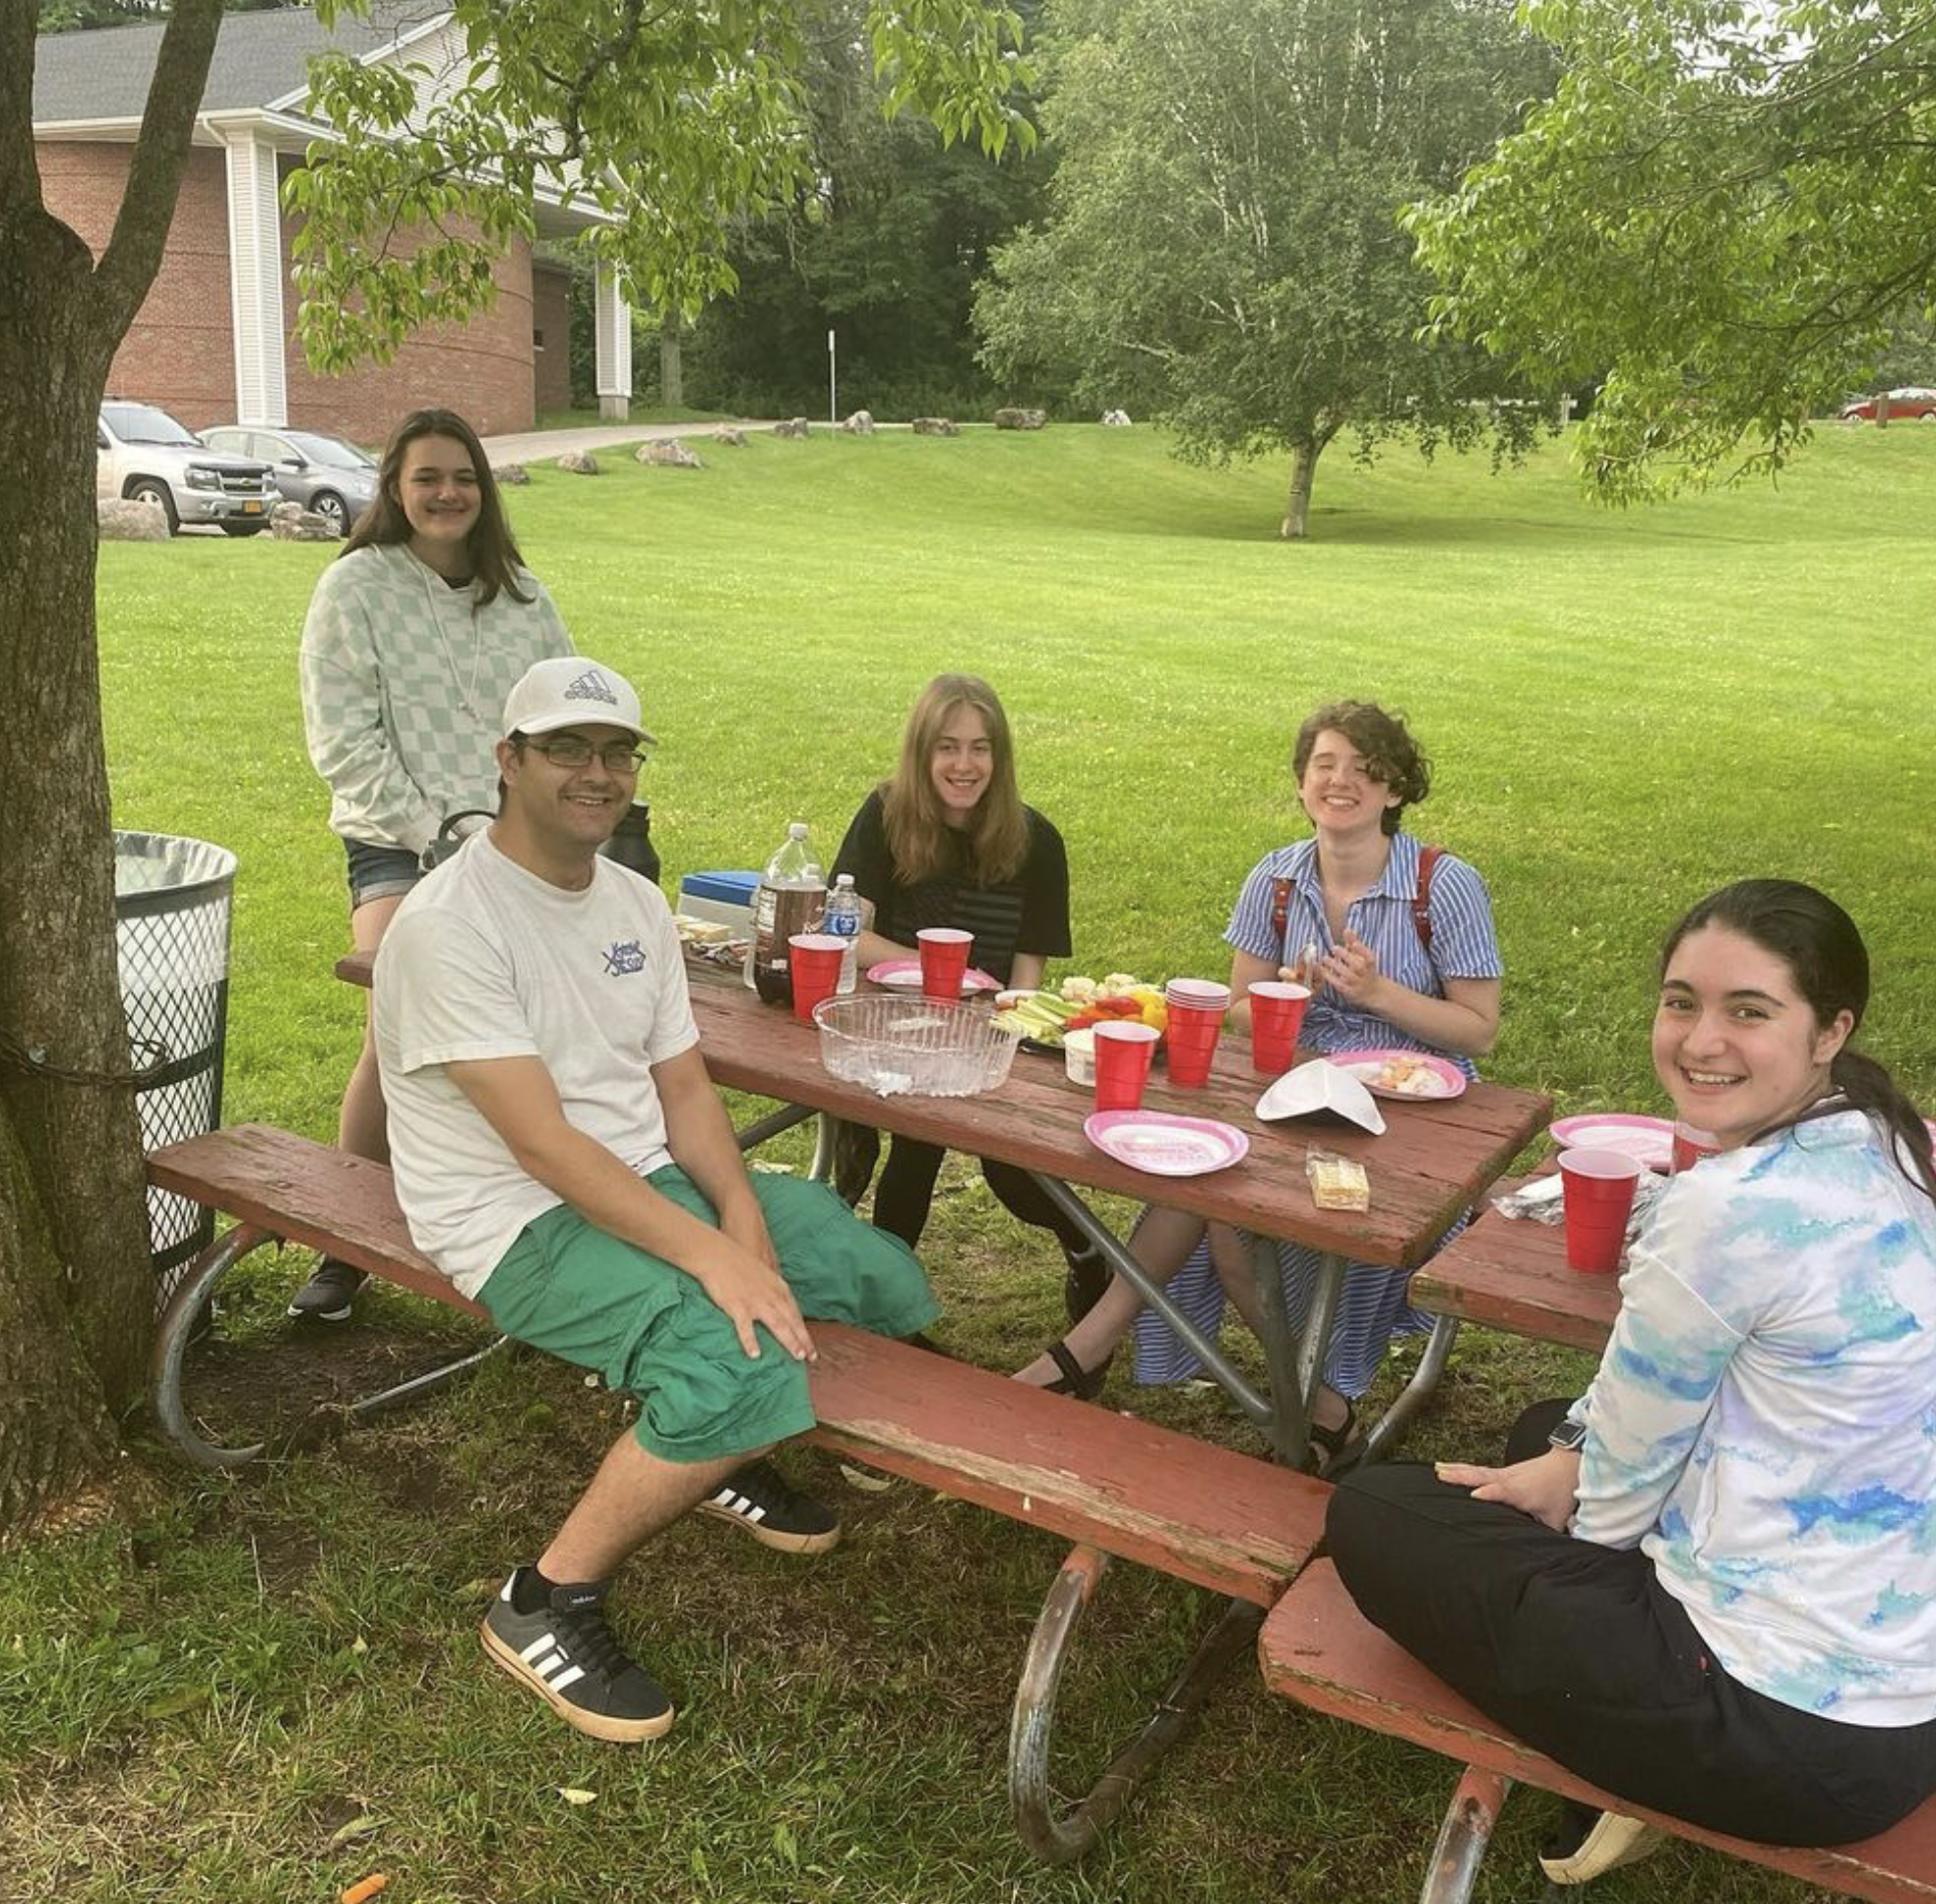 A group of young adults sit around a picnic table smiling at the camera.